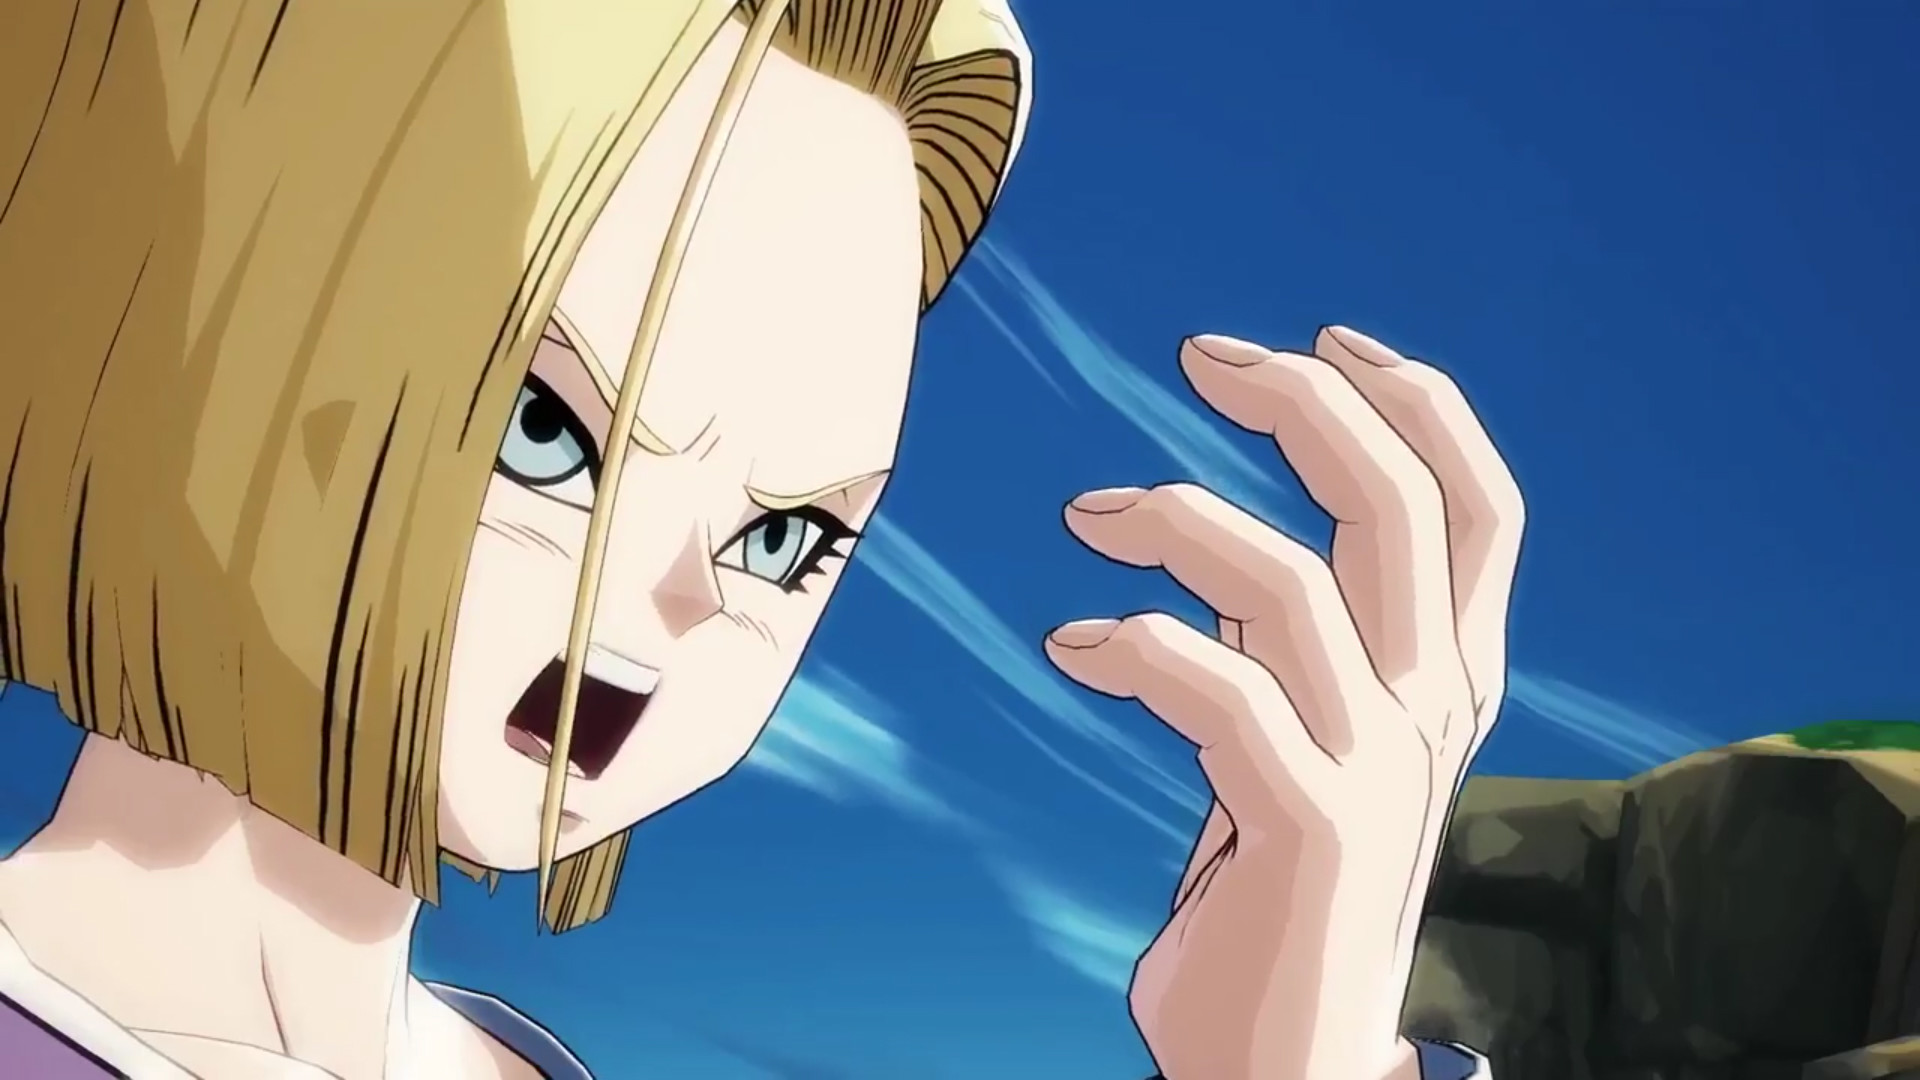 1920x1080 Dragon Ball FighterZ New Trailer [OFFICIAL] : Story Mode Details -  Anime-Fall.net